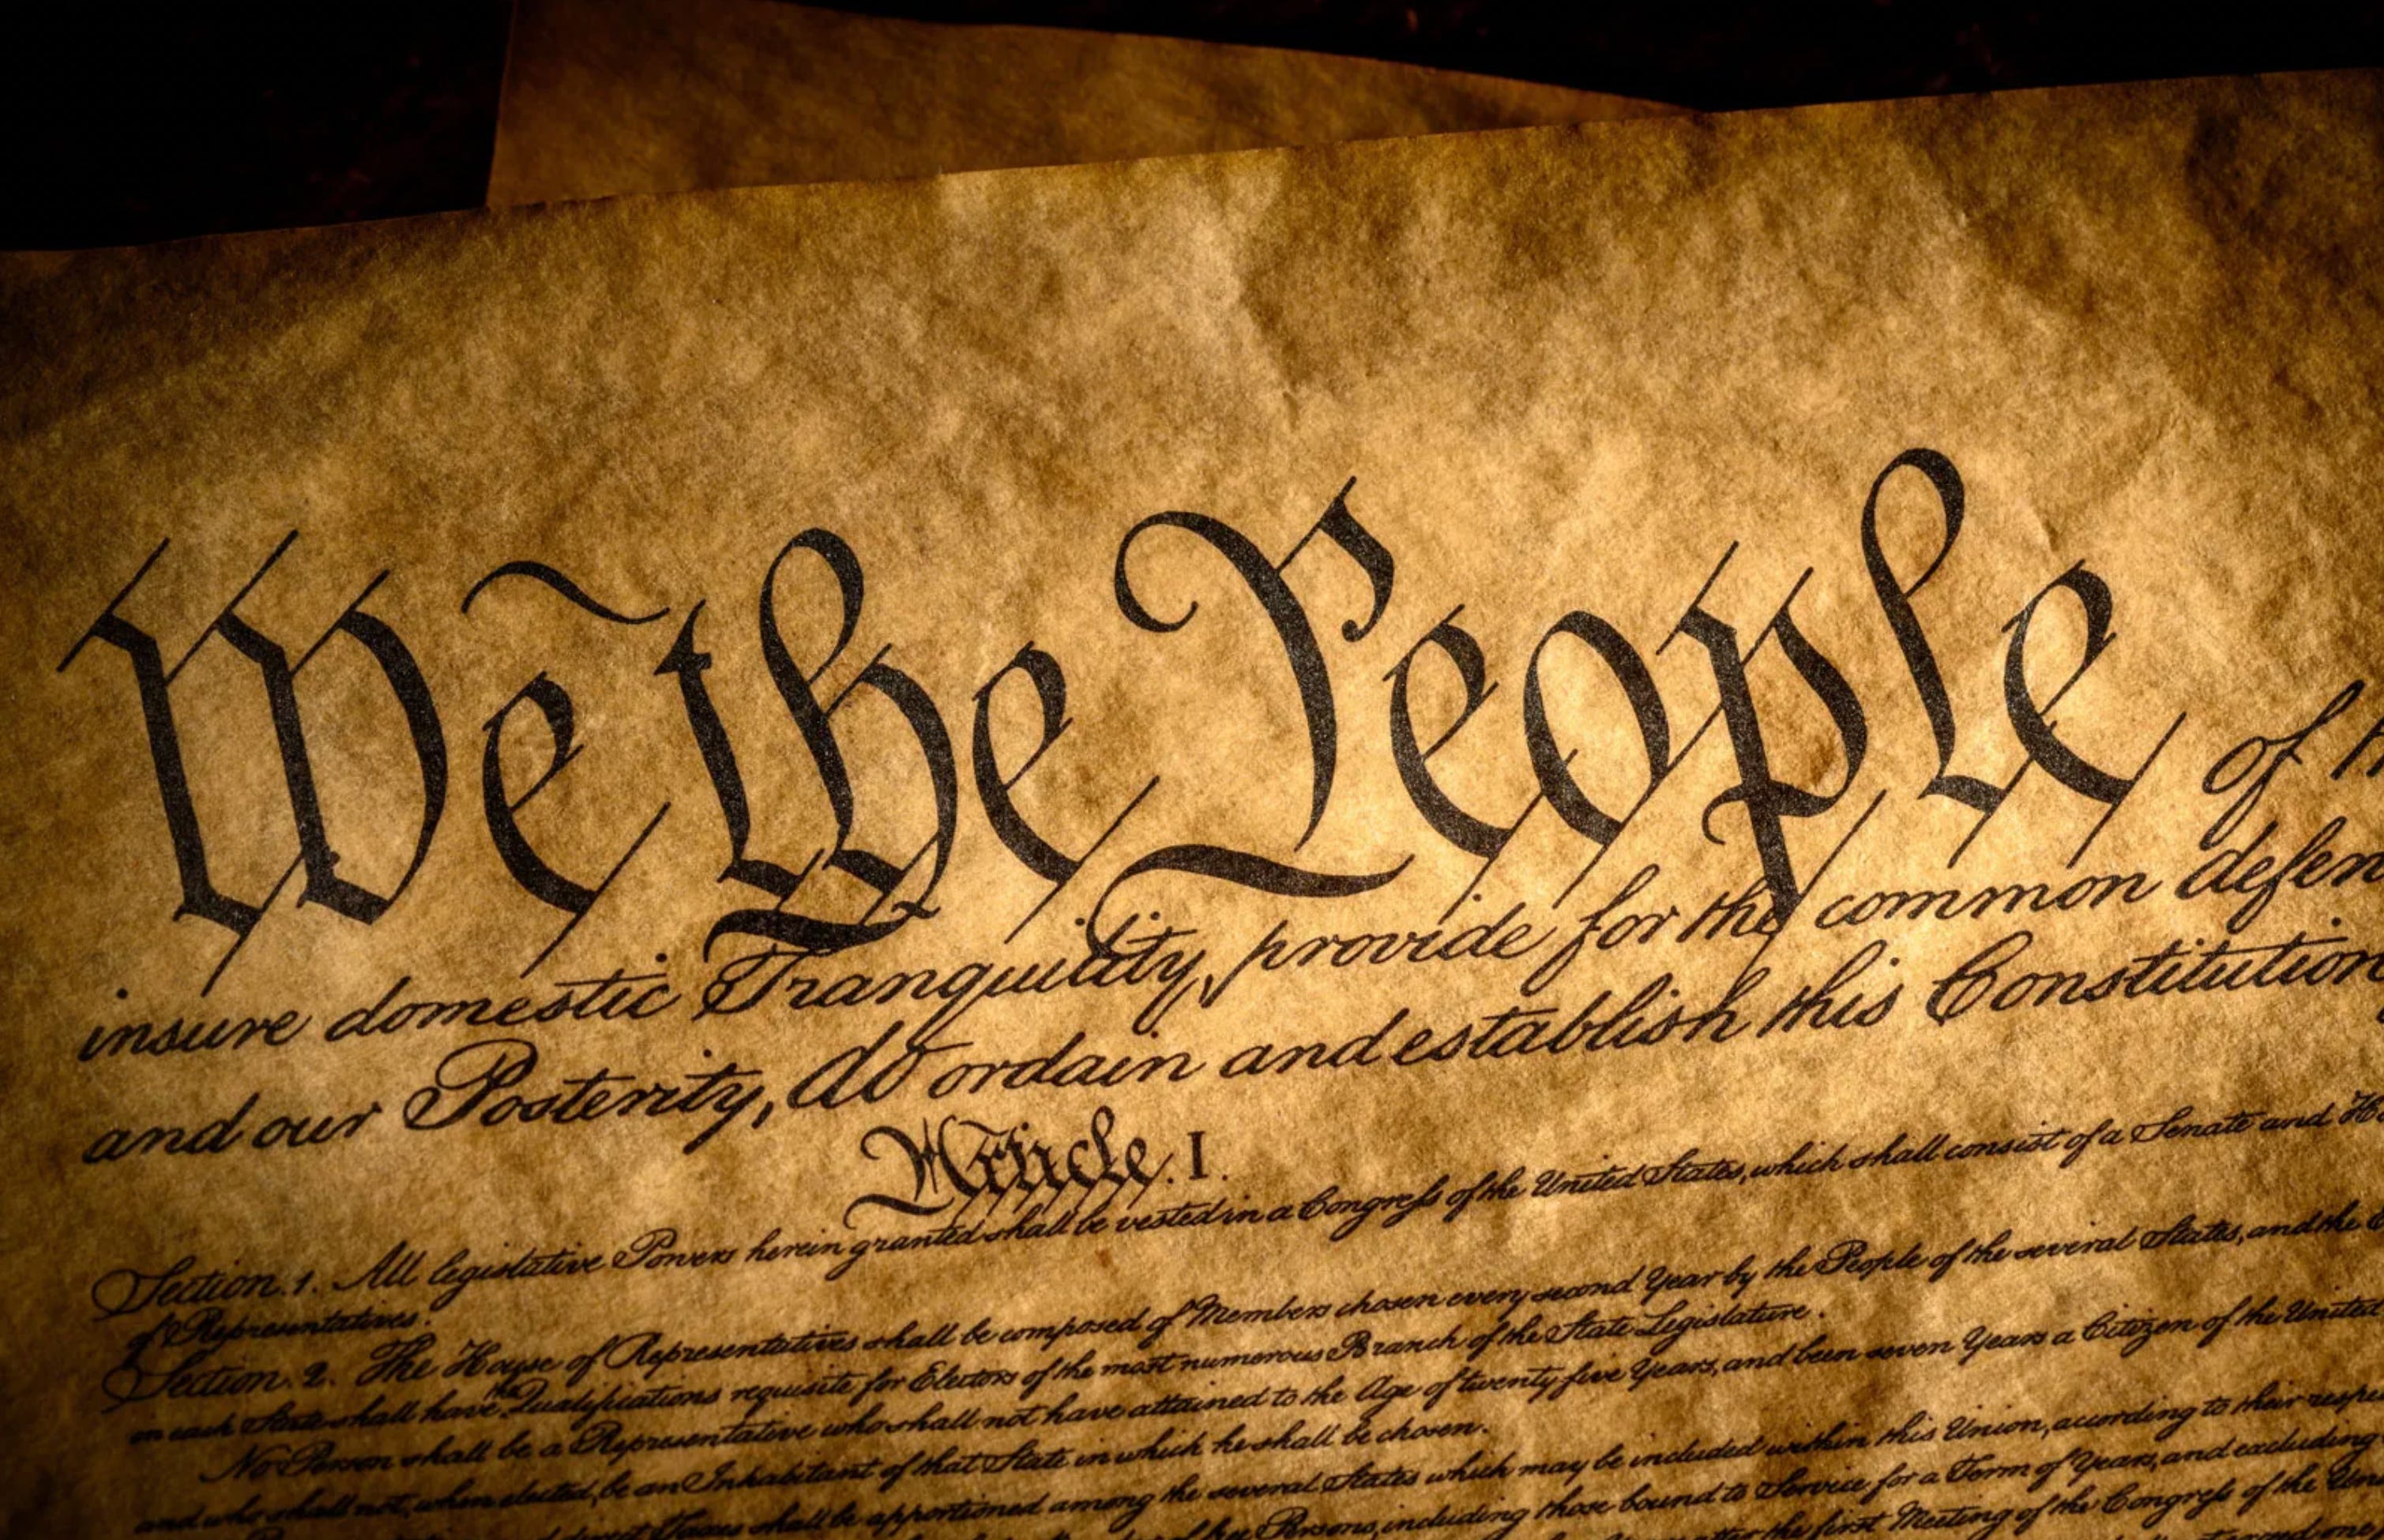 The Constitution of the United States, part 1